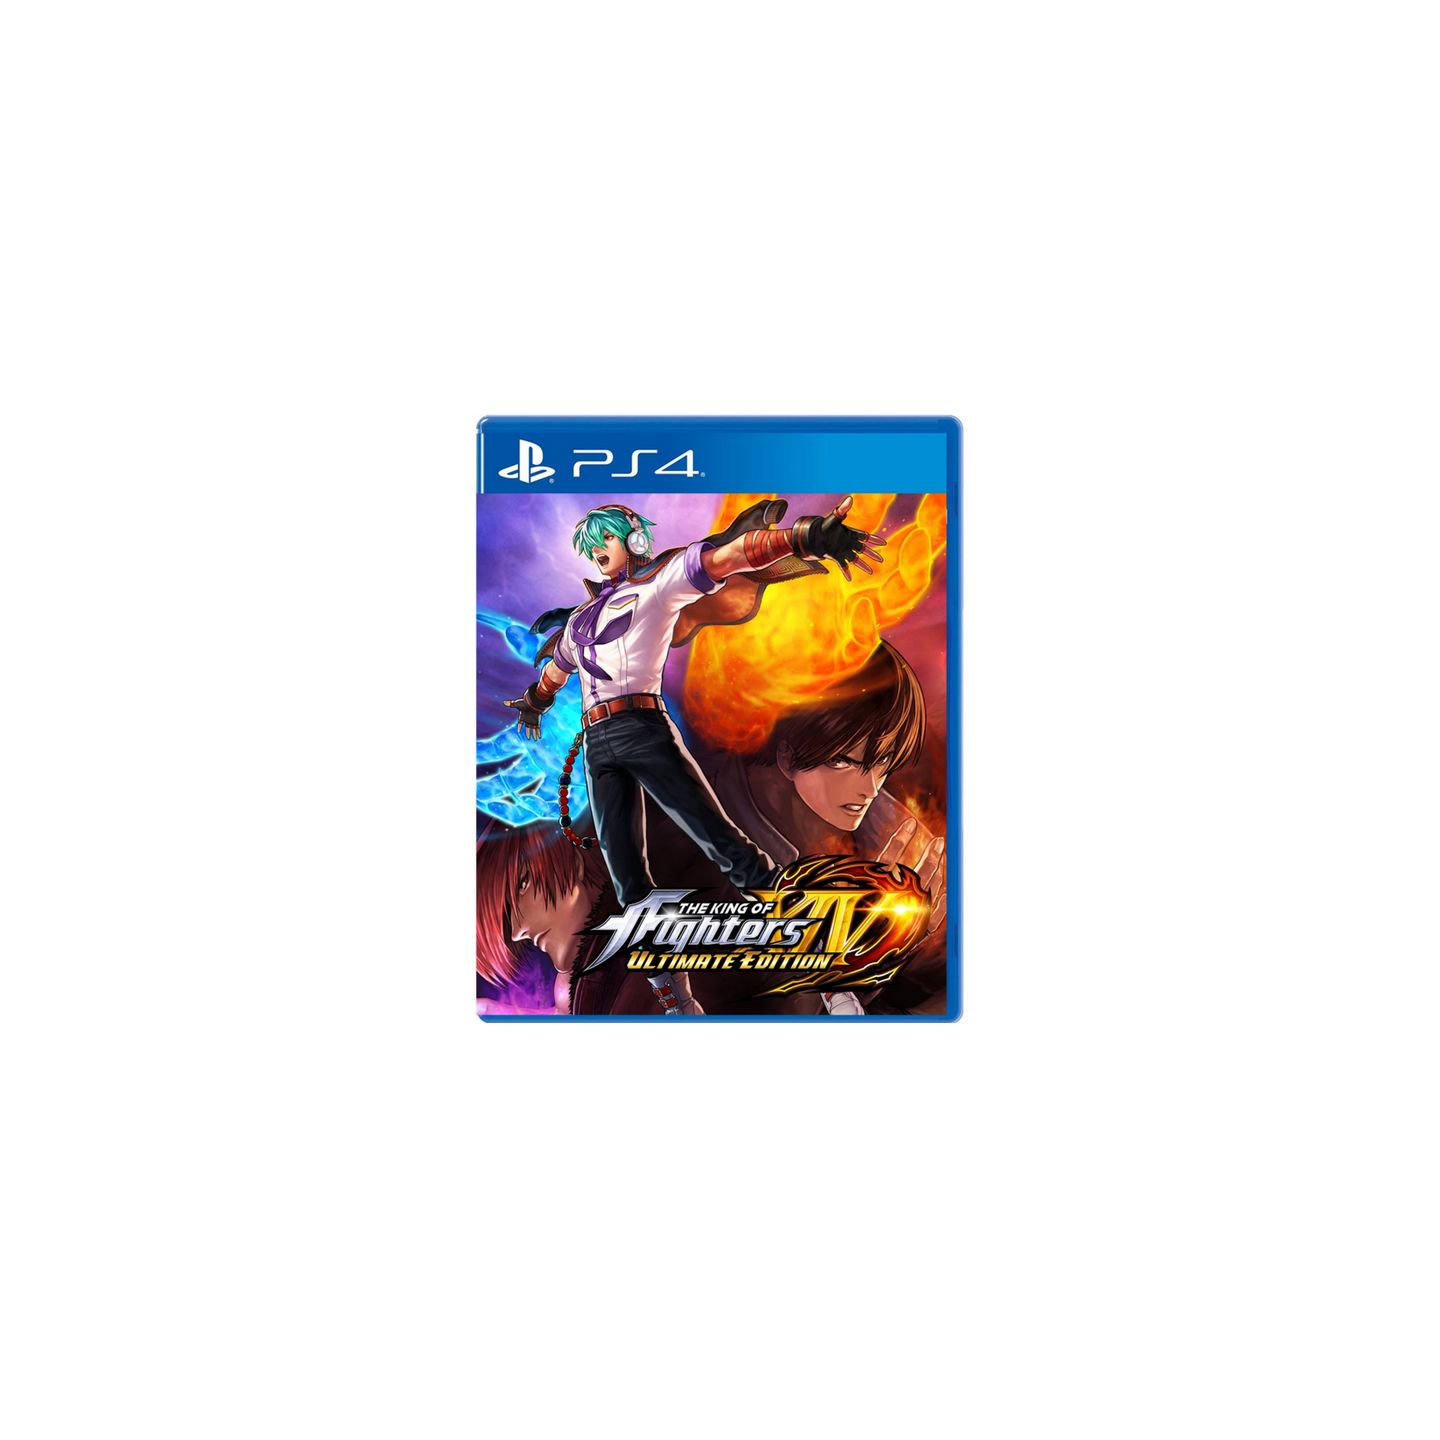 THE KING OF FIGHTERS XIV, PlayStation®4